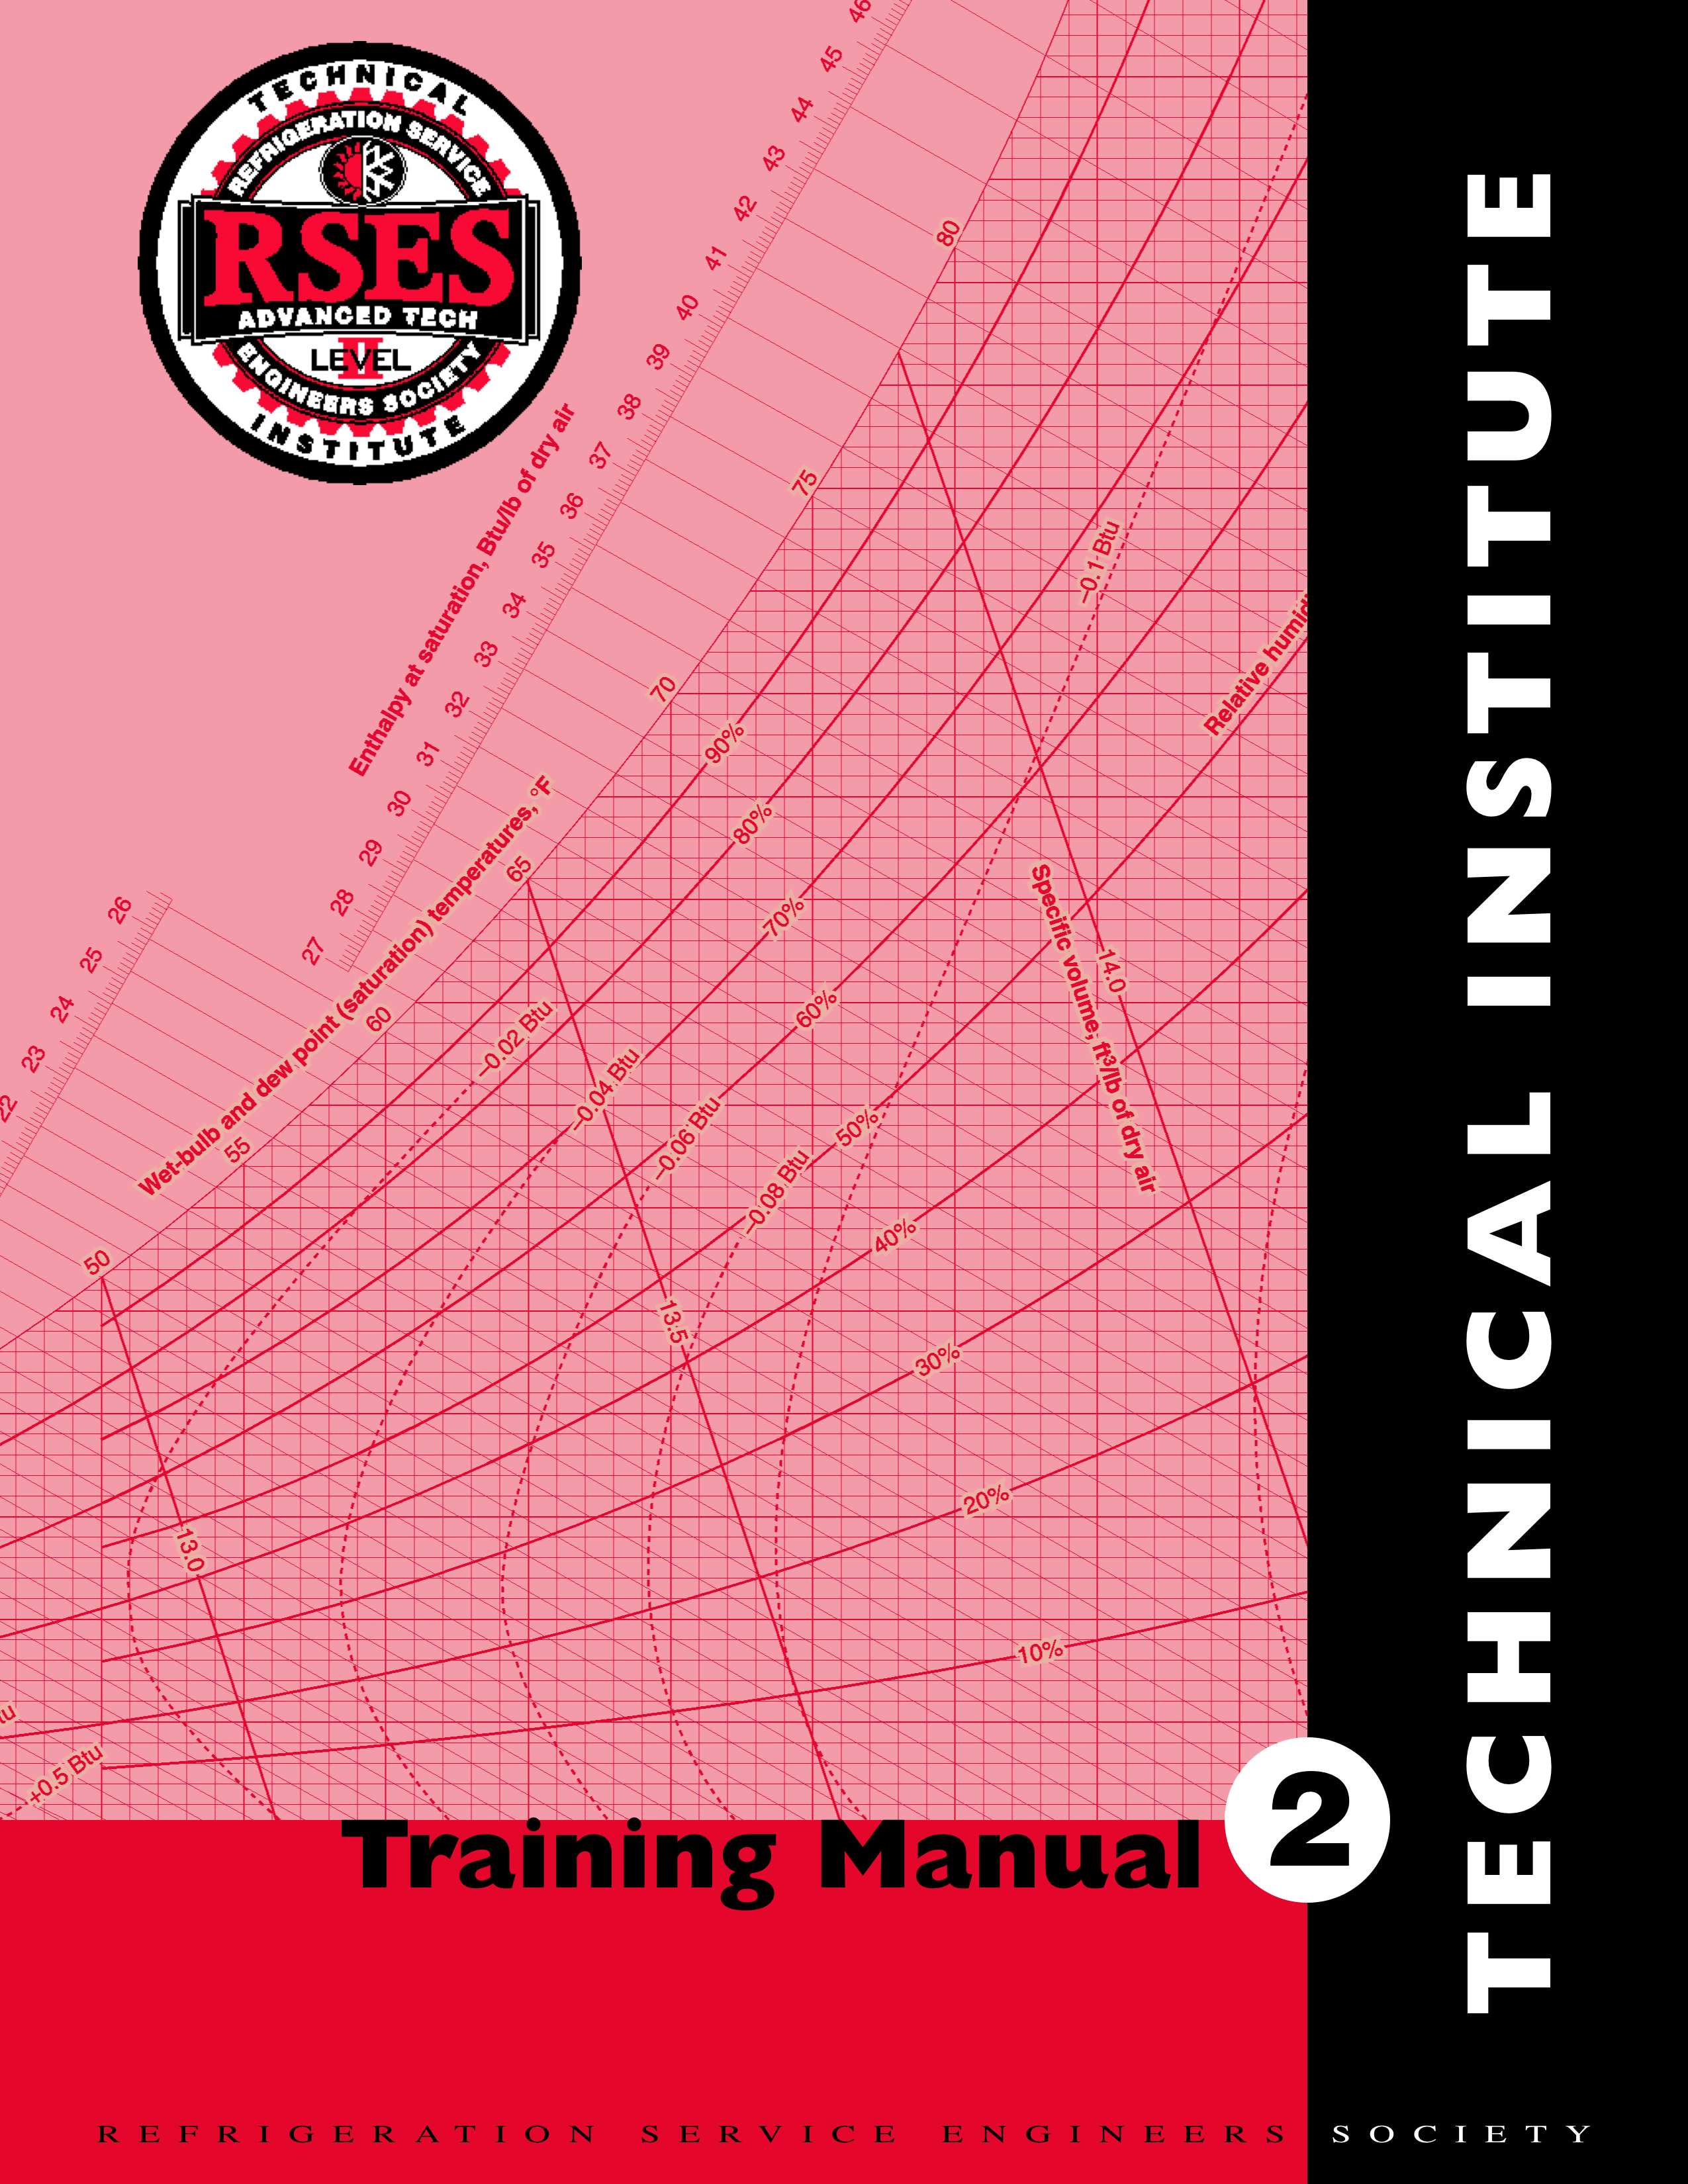 RSES Technical Institute Training Manual 2 Instructor Edition